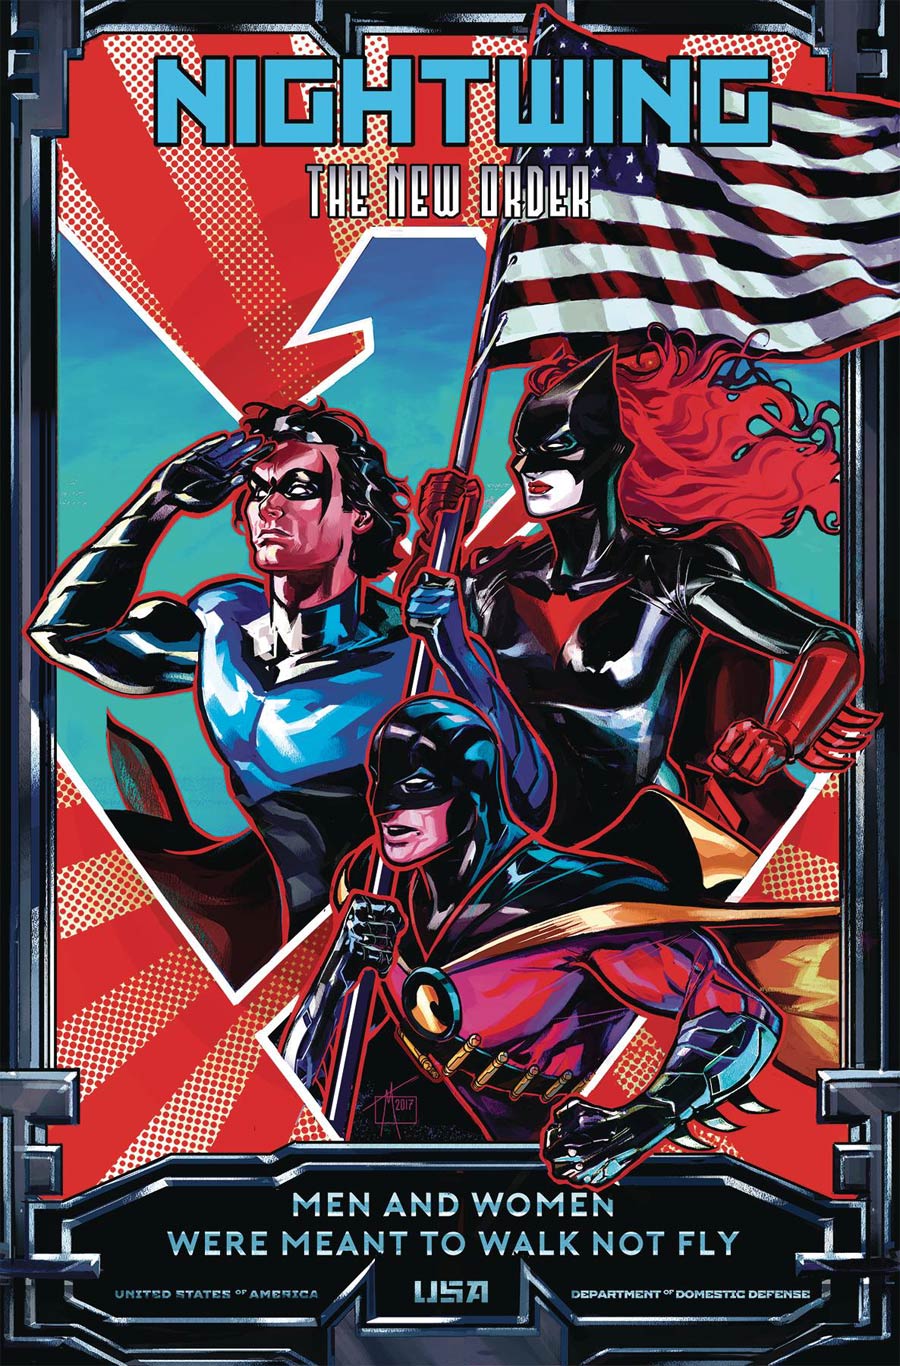 Nightwing The New Order #3